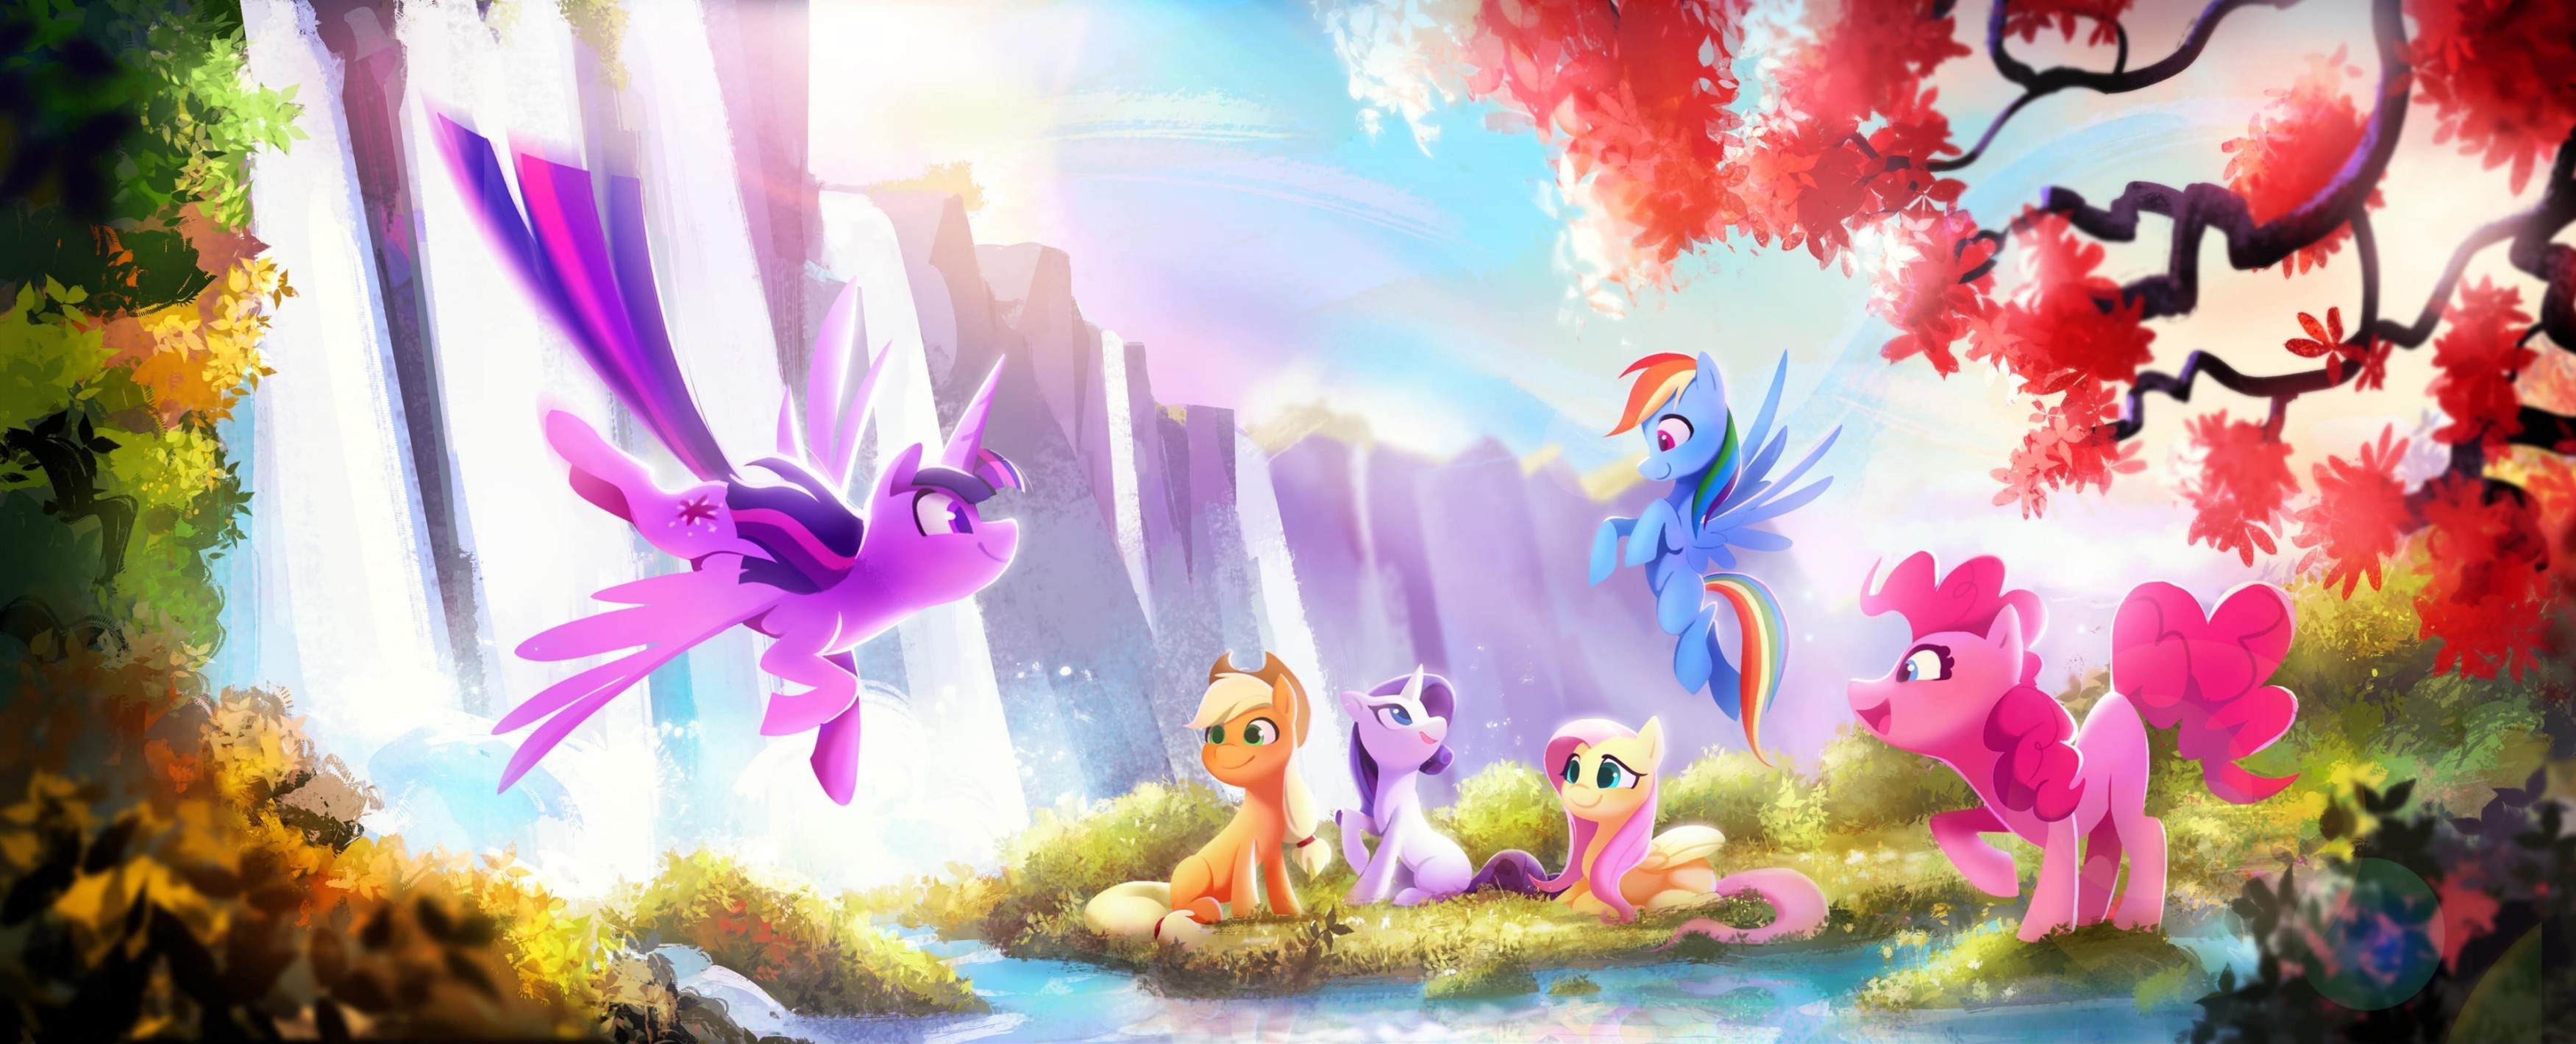 Movie My Little Pony: A New Generation HD Wallpaper by Imalou